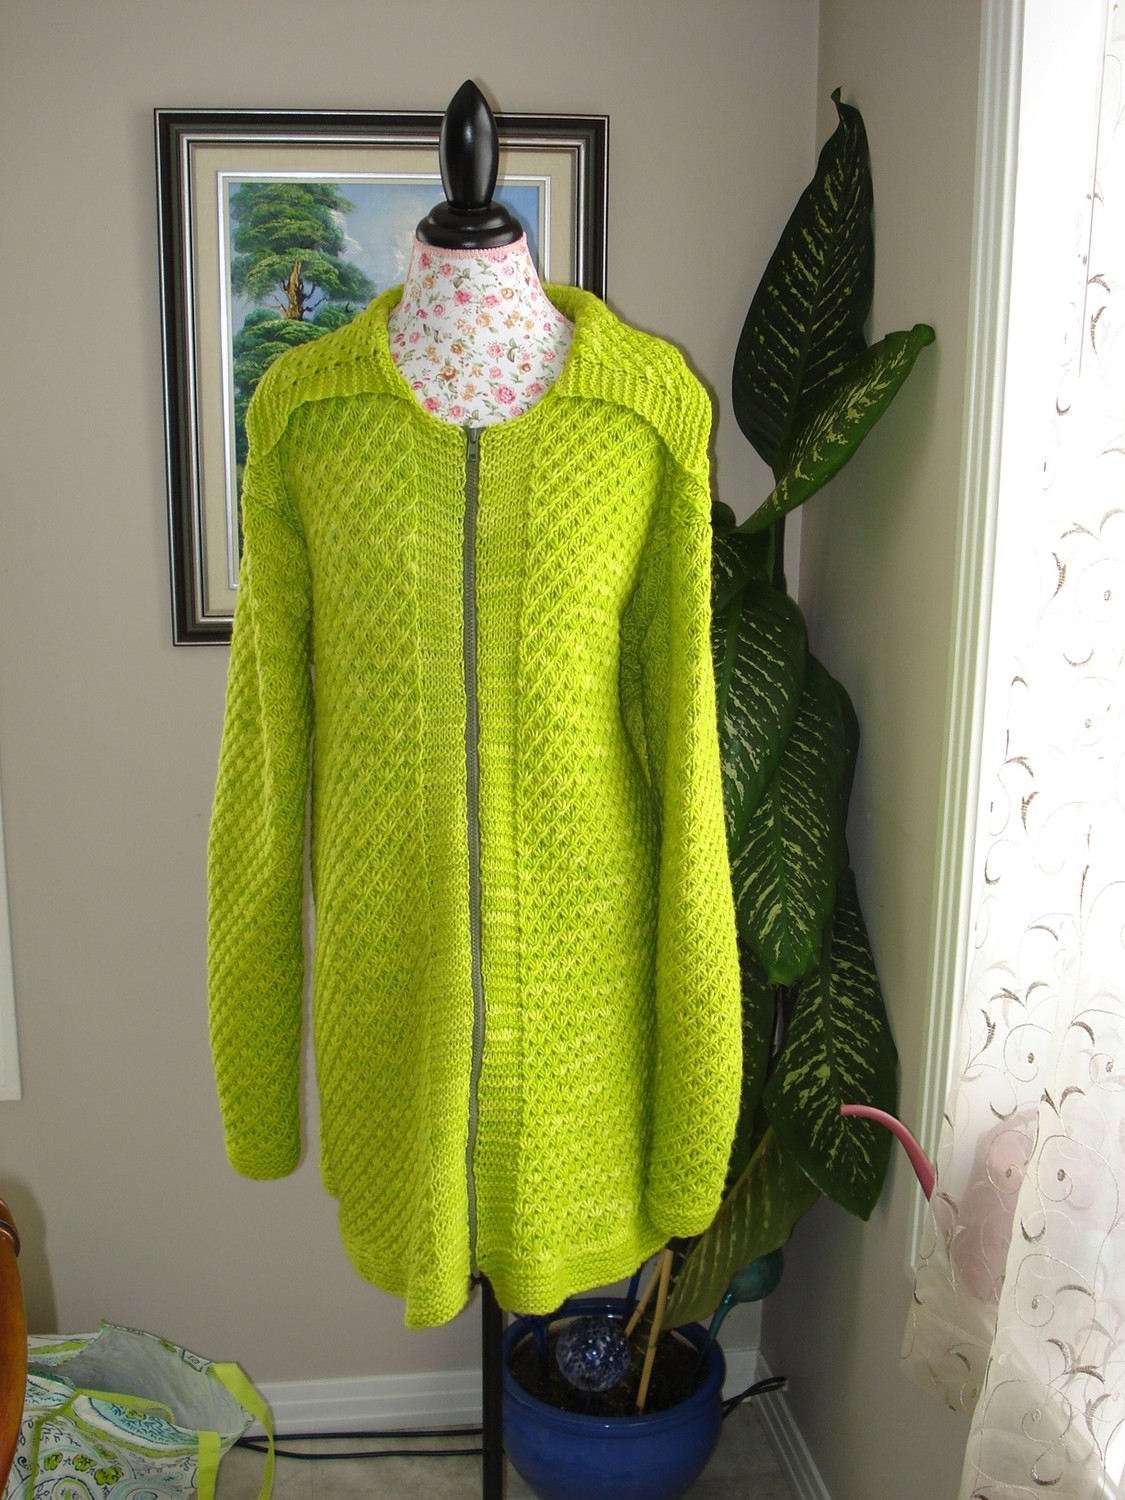 Ready To Ship/handmade Knitted Apple Green Coat/ Cardigan For Both Gender/ Fit For Woman Size Xl/ 2x/ 3x Even For 4x